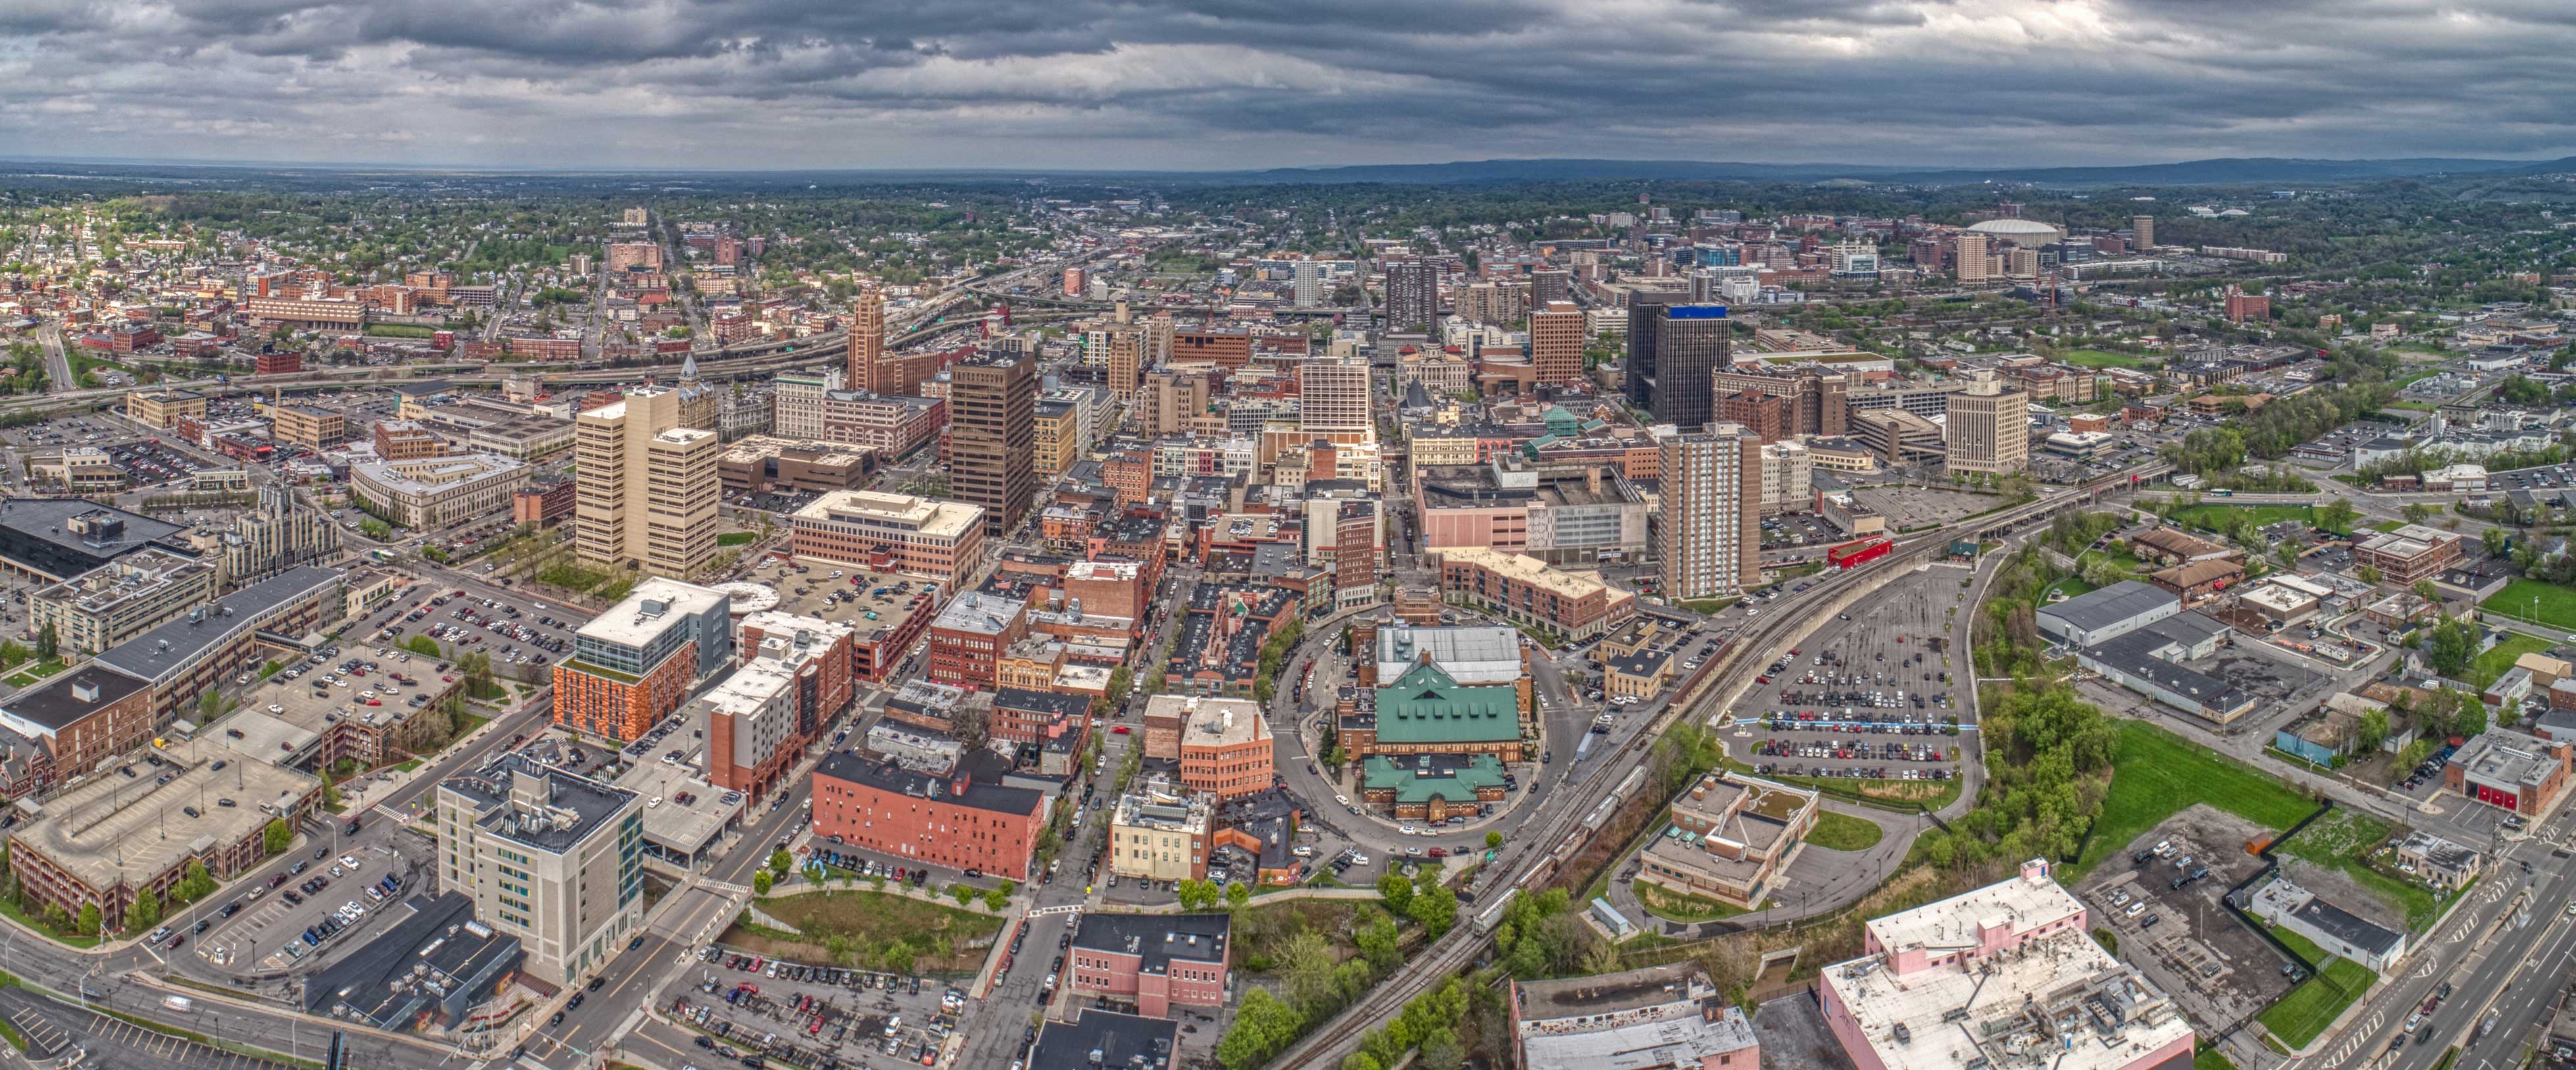 Aerial view of Syracuse on a cloudy day 